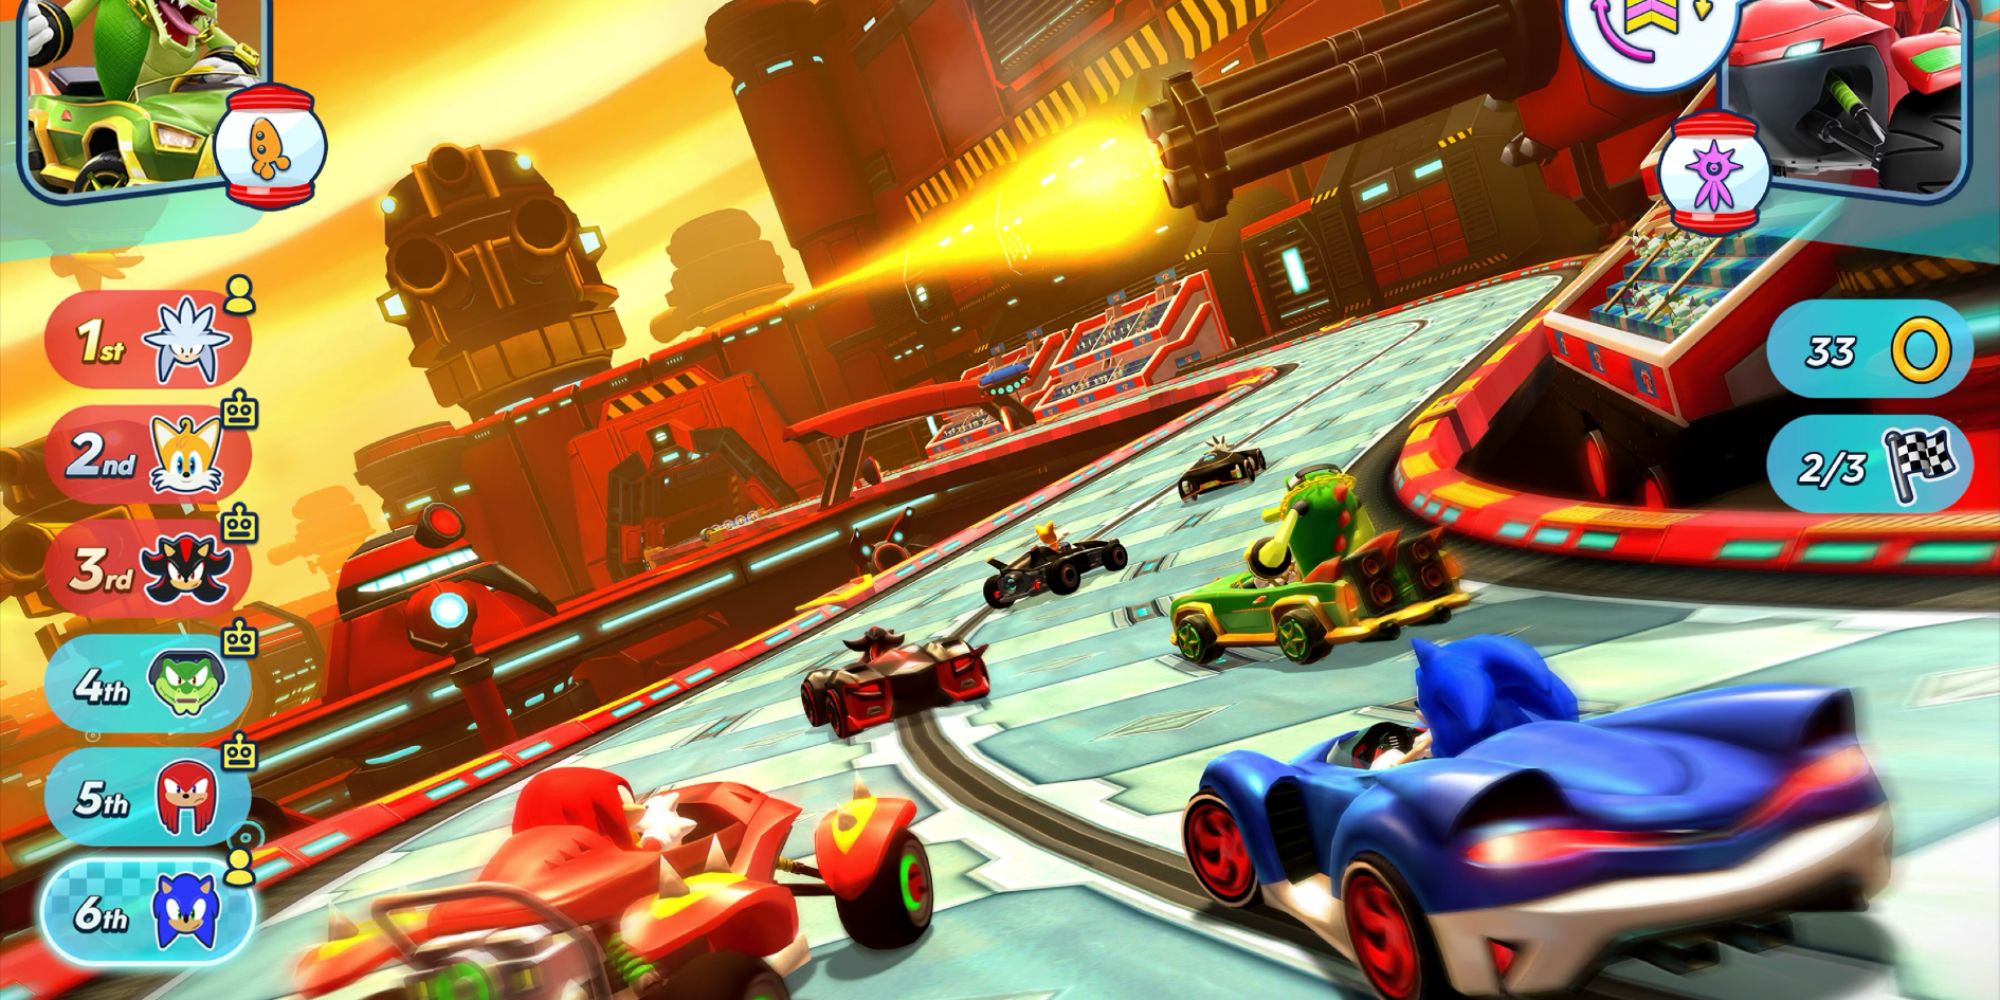 Sonic characters driving racing cars in Sonic Racing multiplayer Apple Arcade game